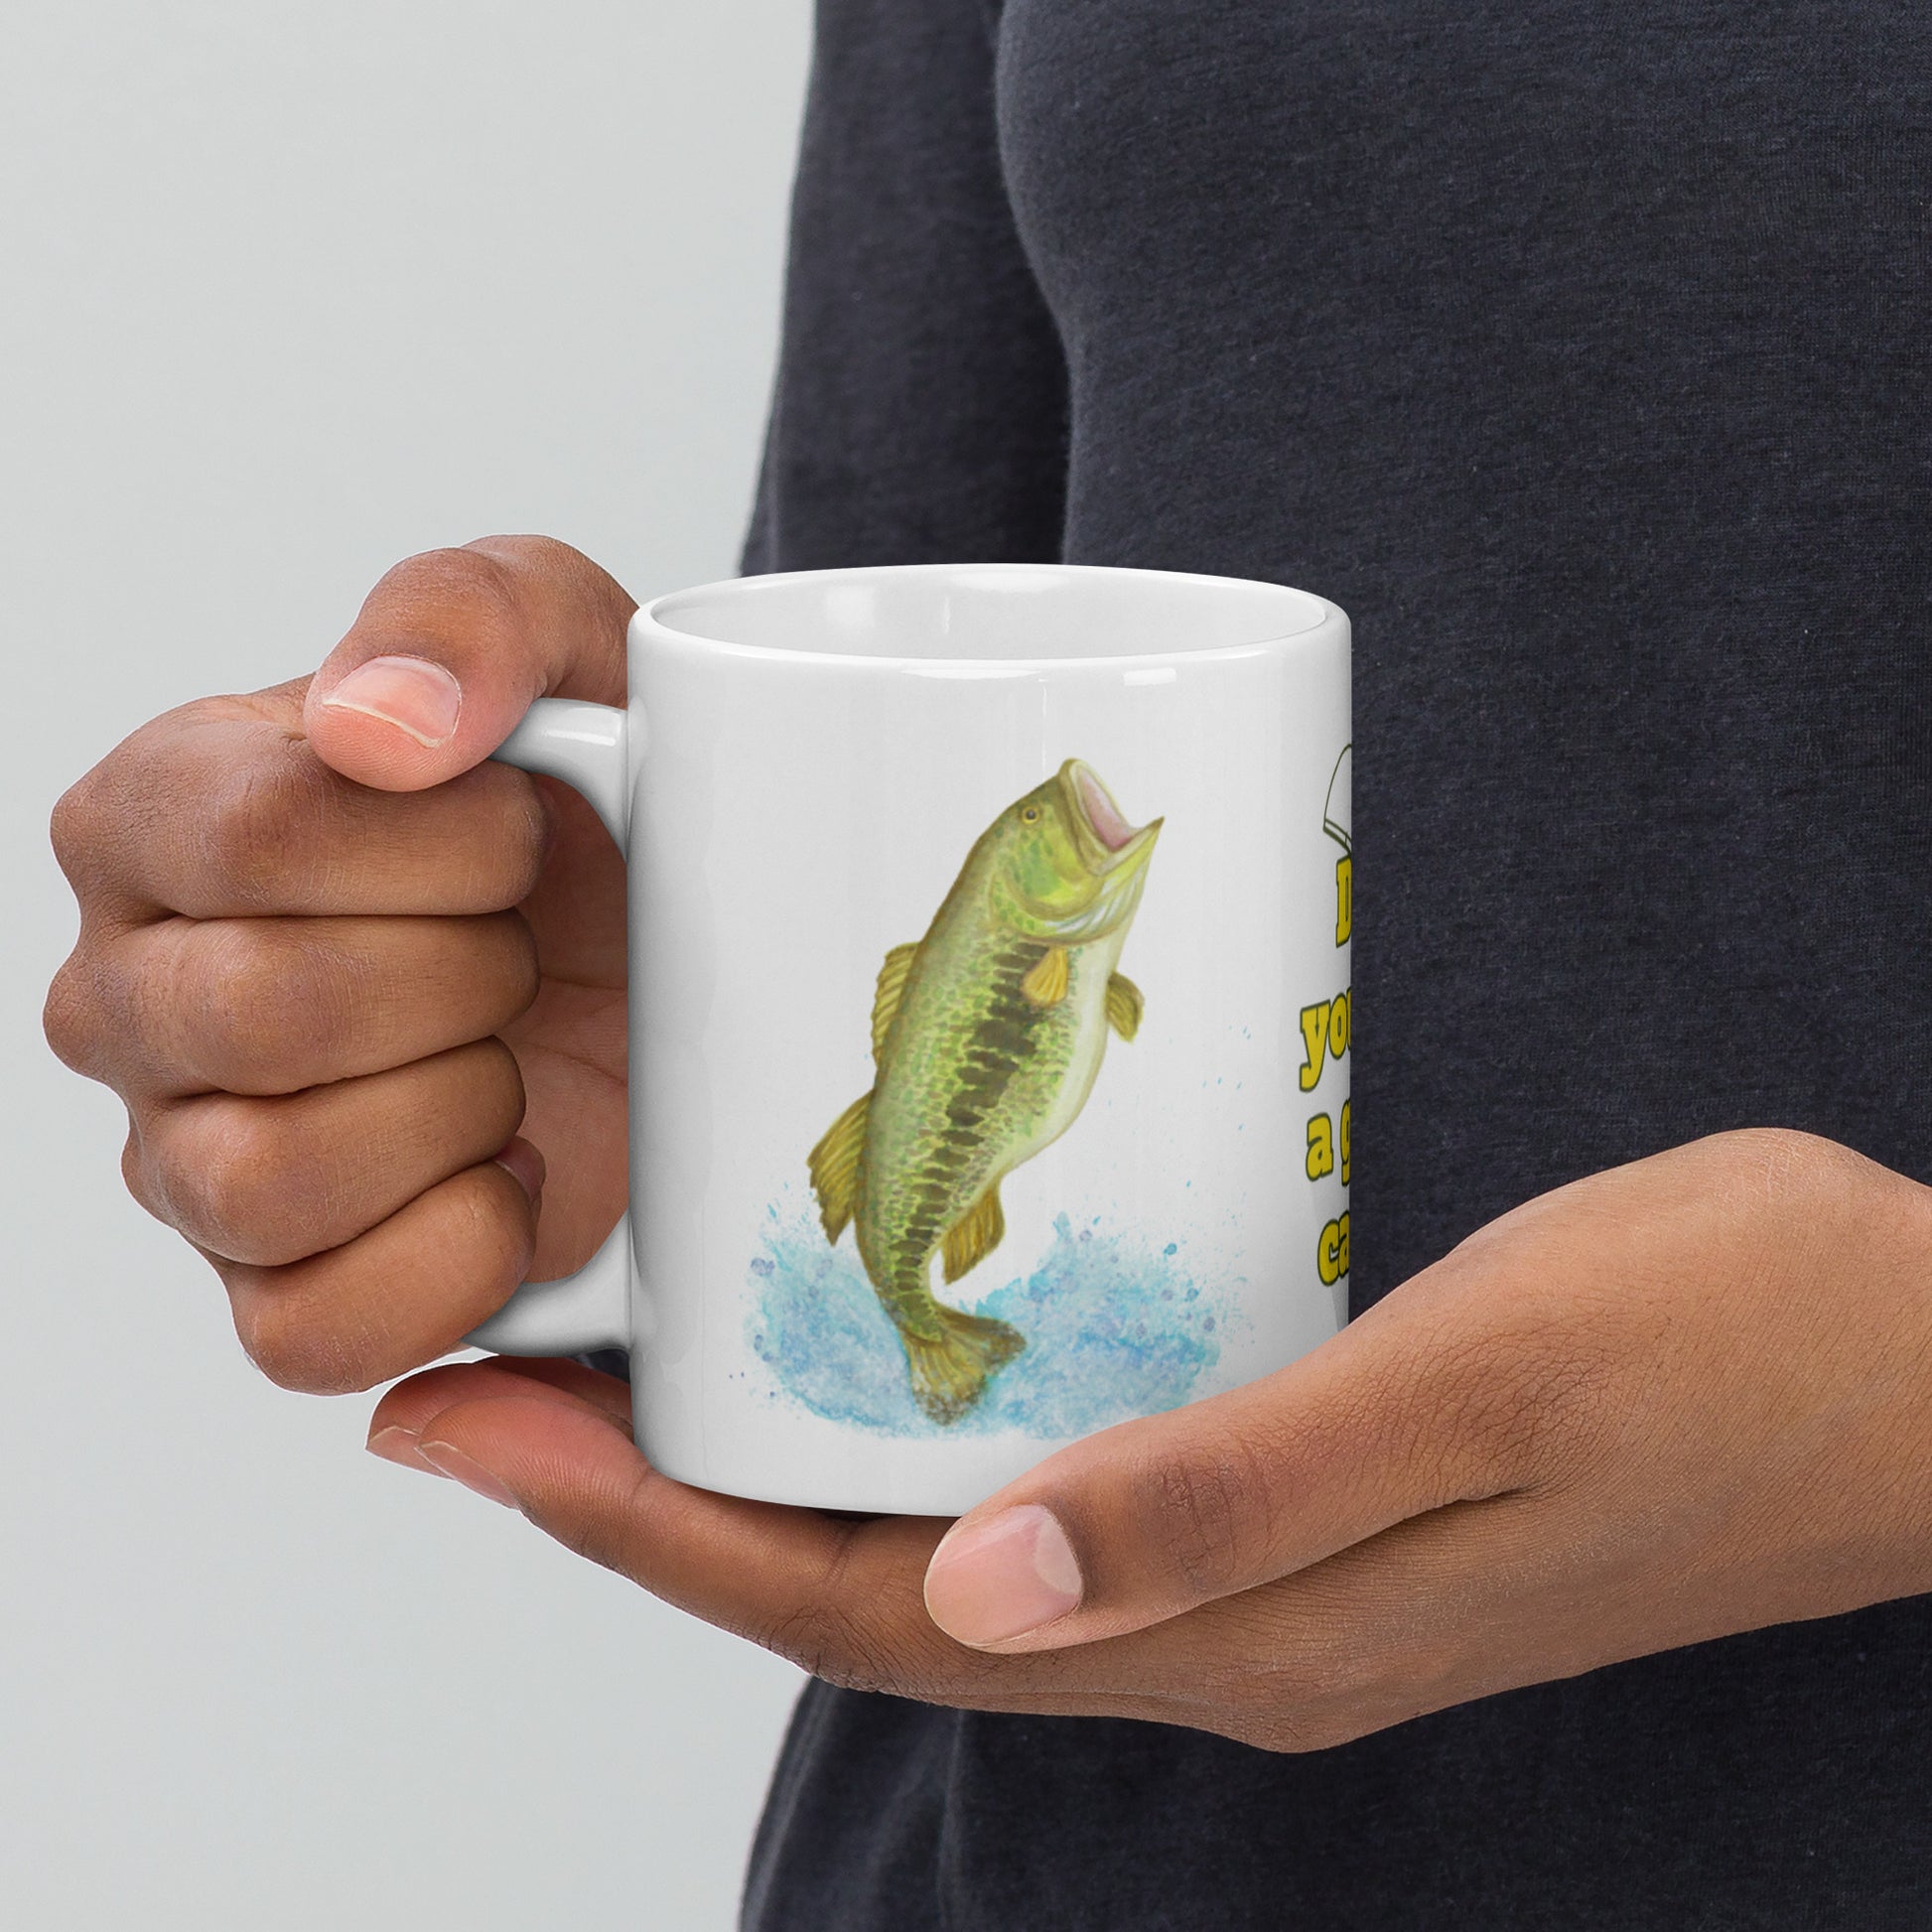 11 ounce ceramic mug. Features watercolor print of a rainbow trout and a largemouth bass with text that says: Dad, you are a great catch! Shown in hand of model.